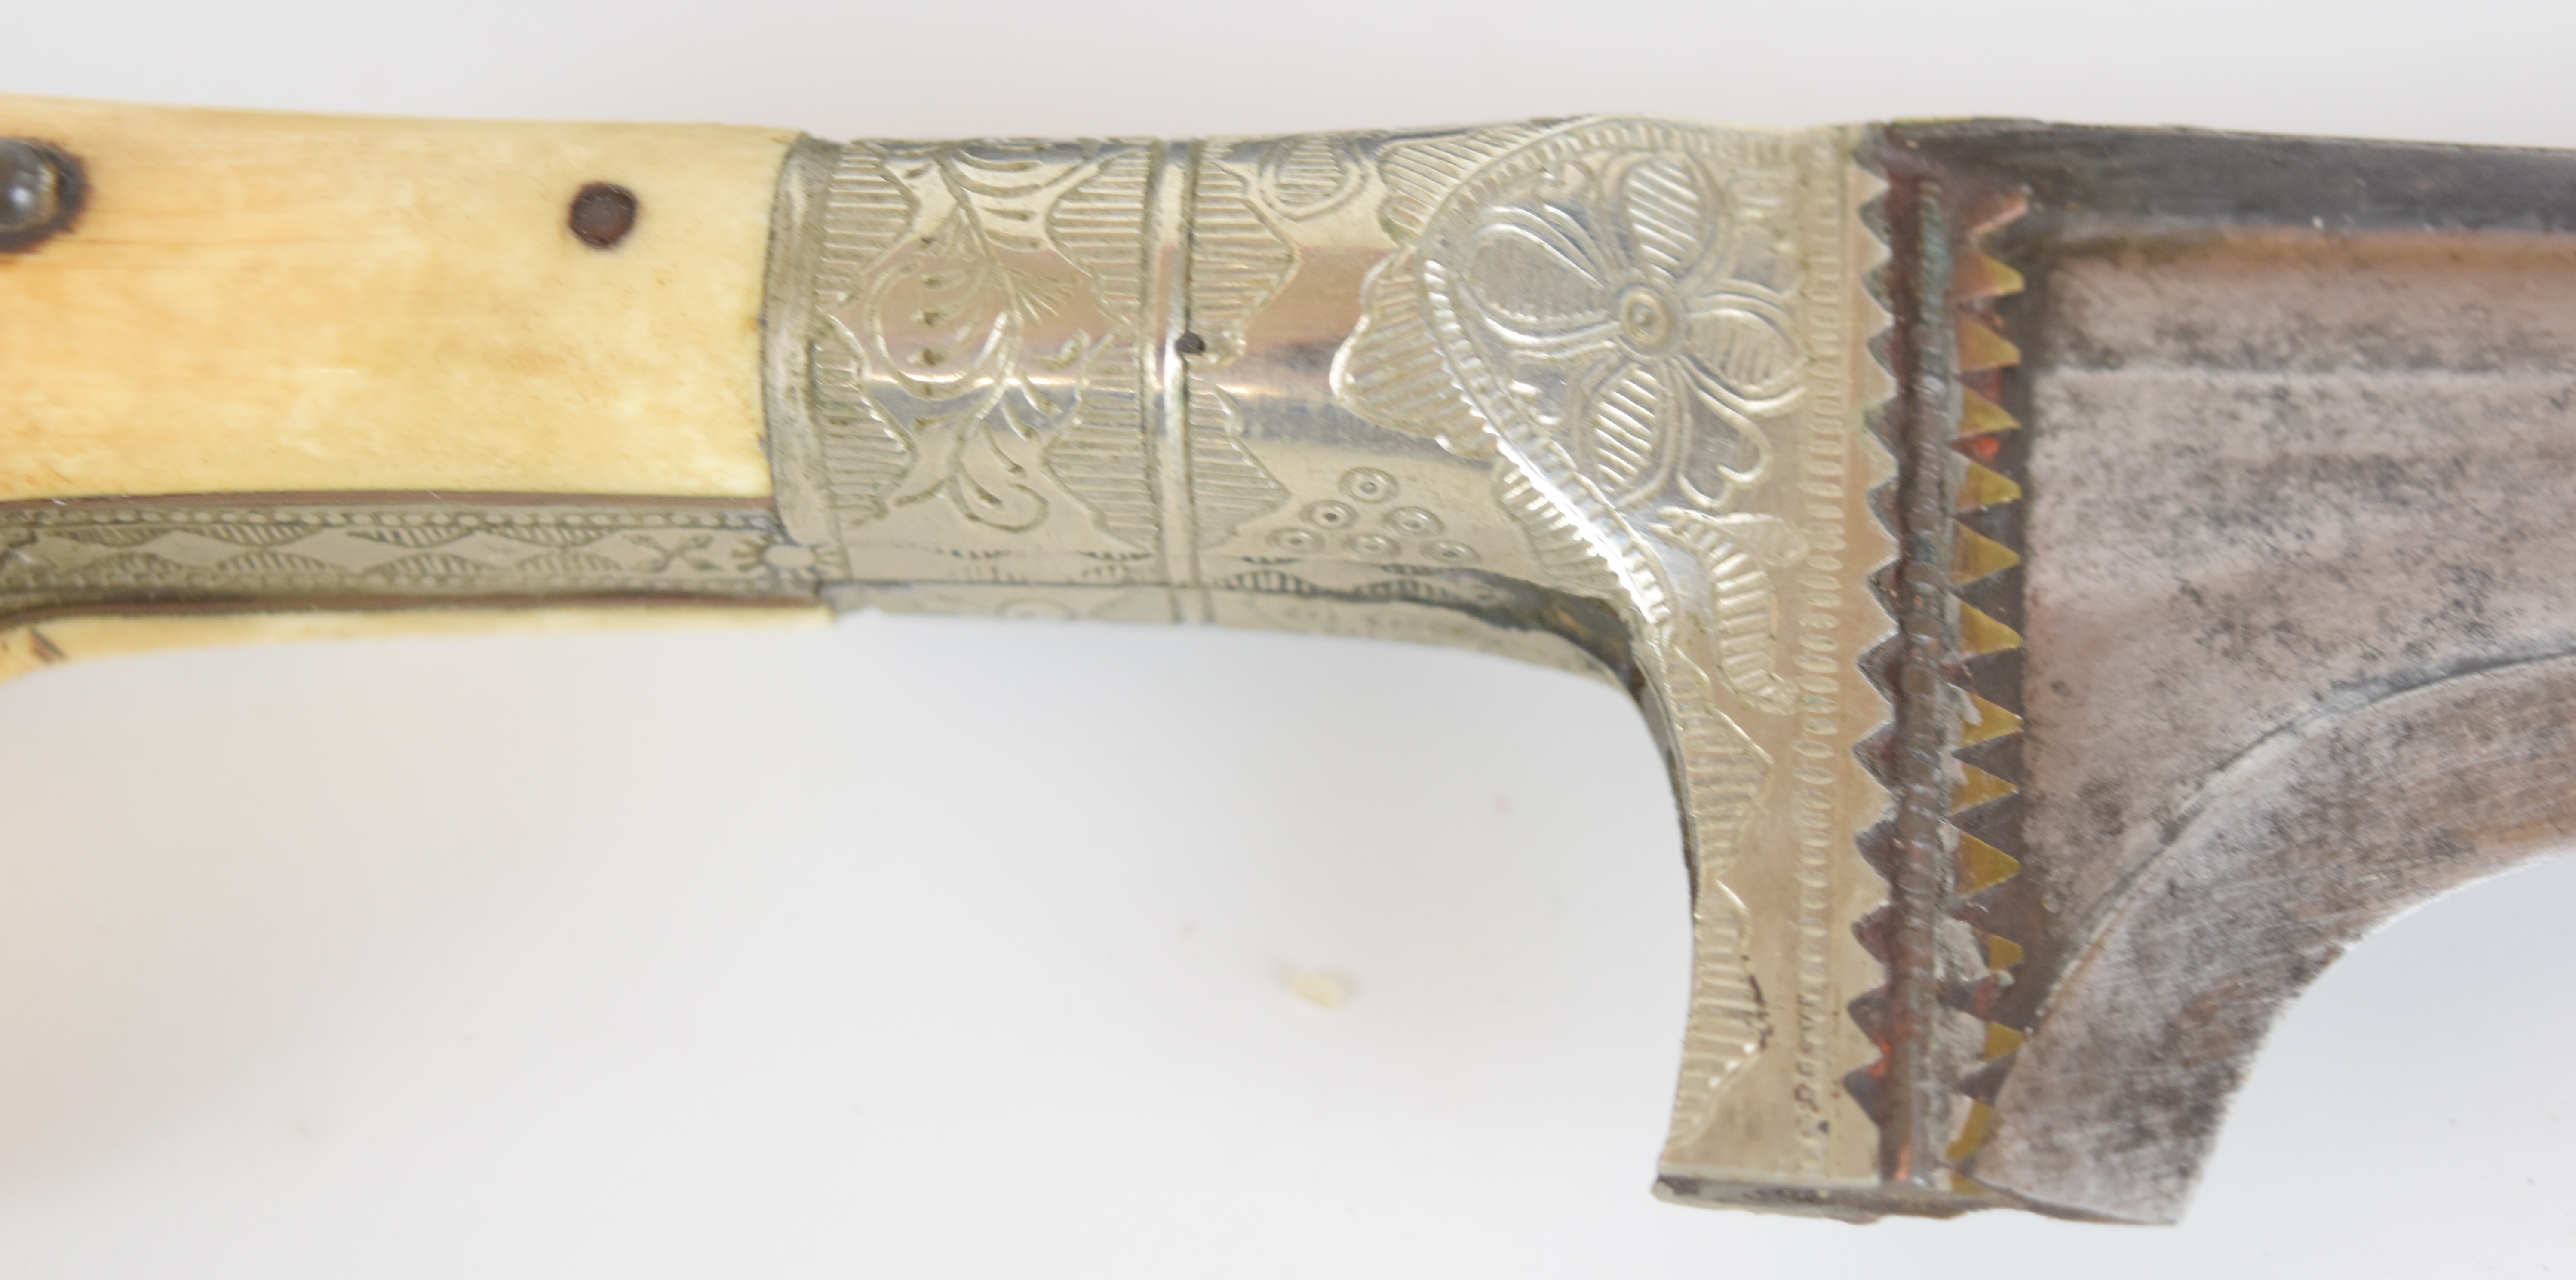 Indo Persian Pesh-Kabz knife or dagger with ivory grips to the curved handle, engraved decoration - Image 7 of 8